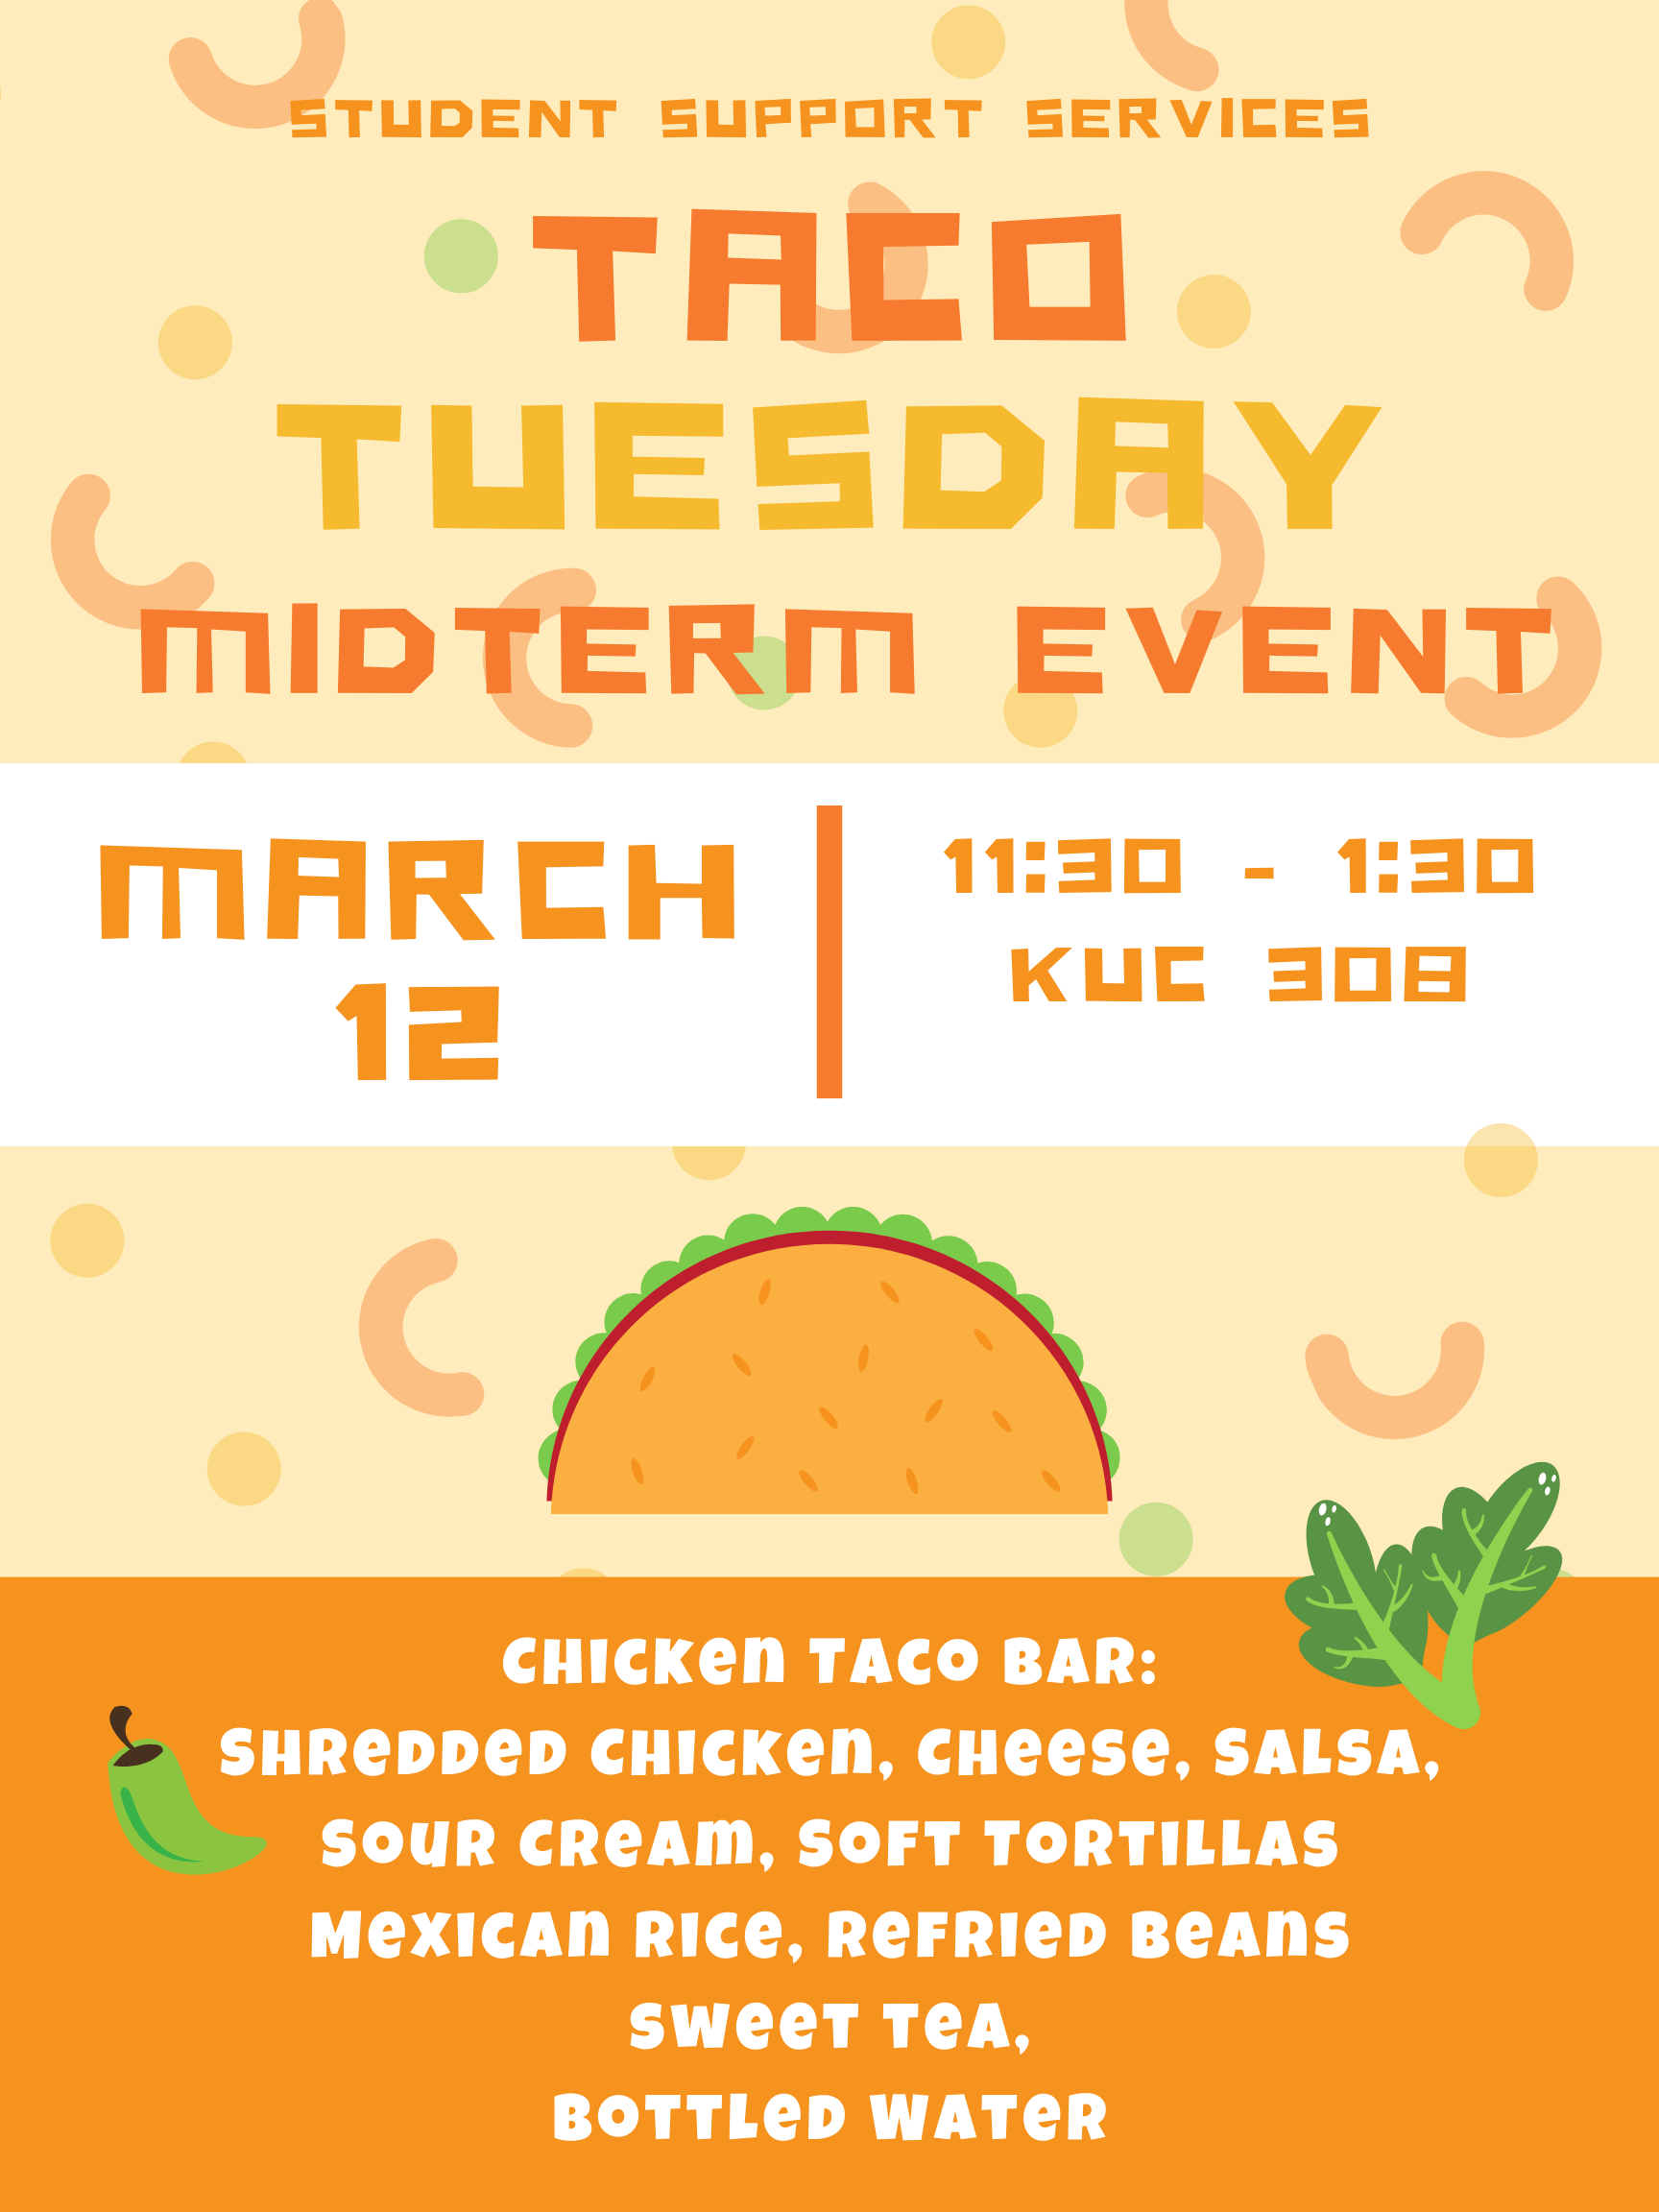 Midterm Review Lunch - March 12th - 11:30a - SSS Office